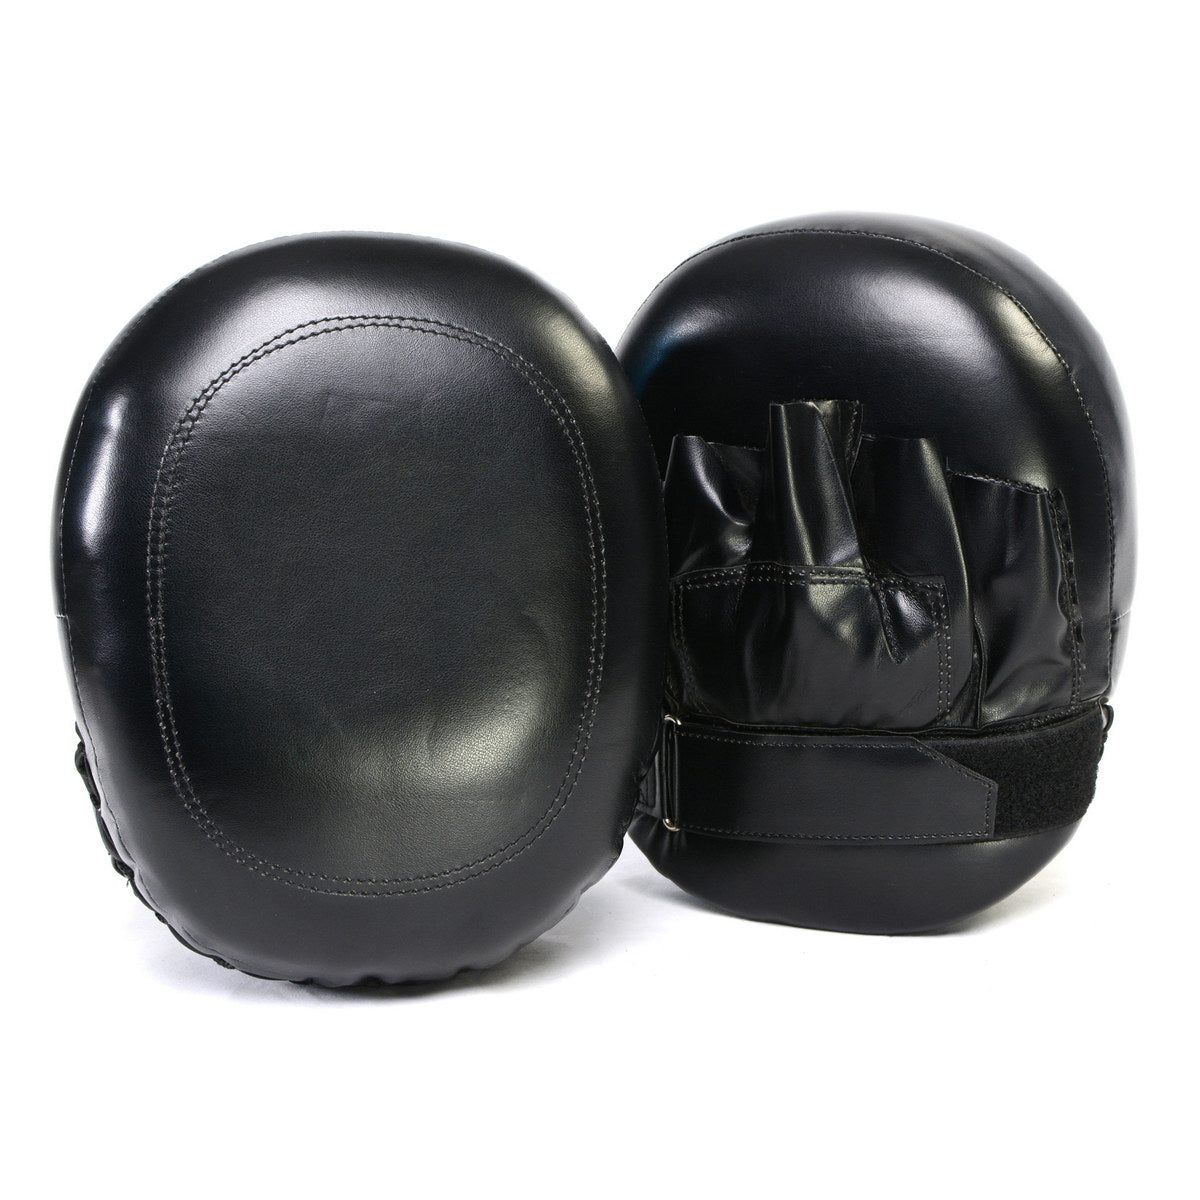 X Fitness XF8001 Black Punch Focus Mitts for Boxing, MMA, Kickboxing, Muay Thai - Pair